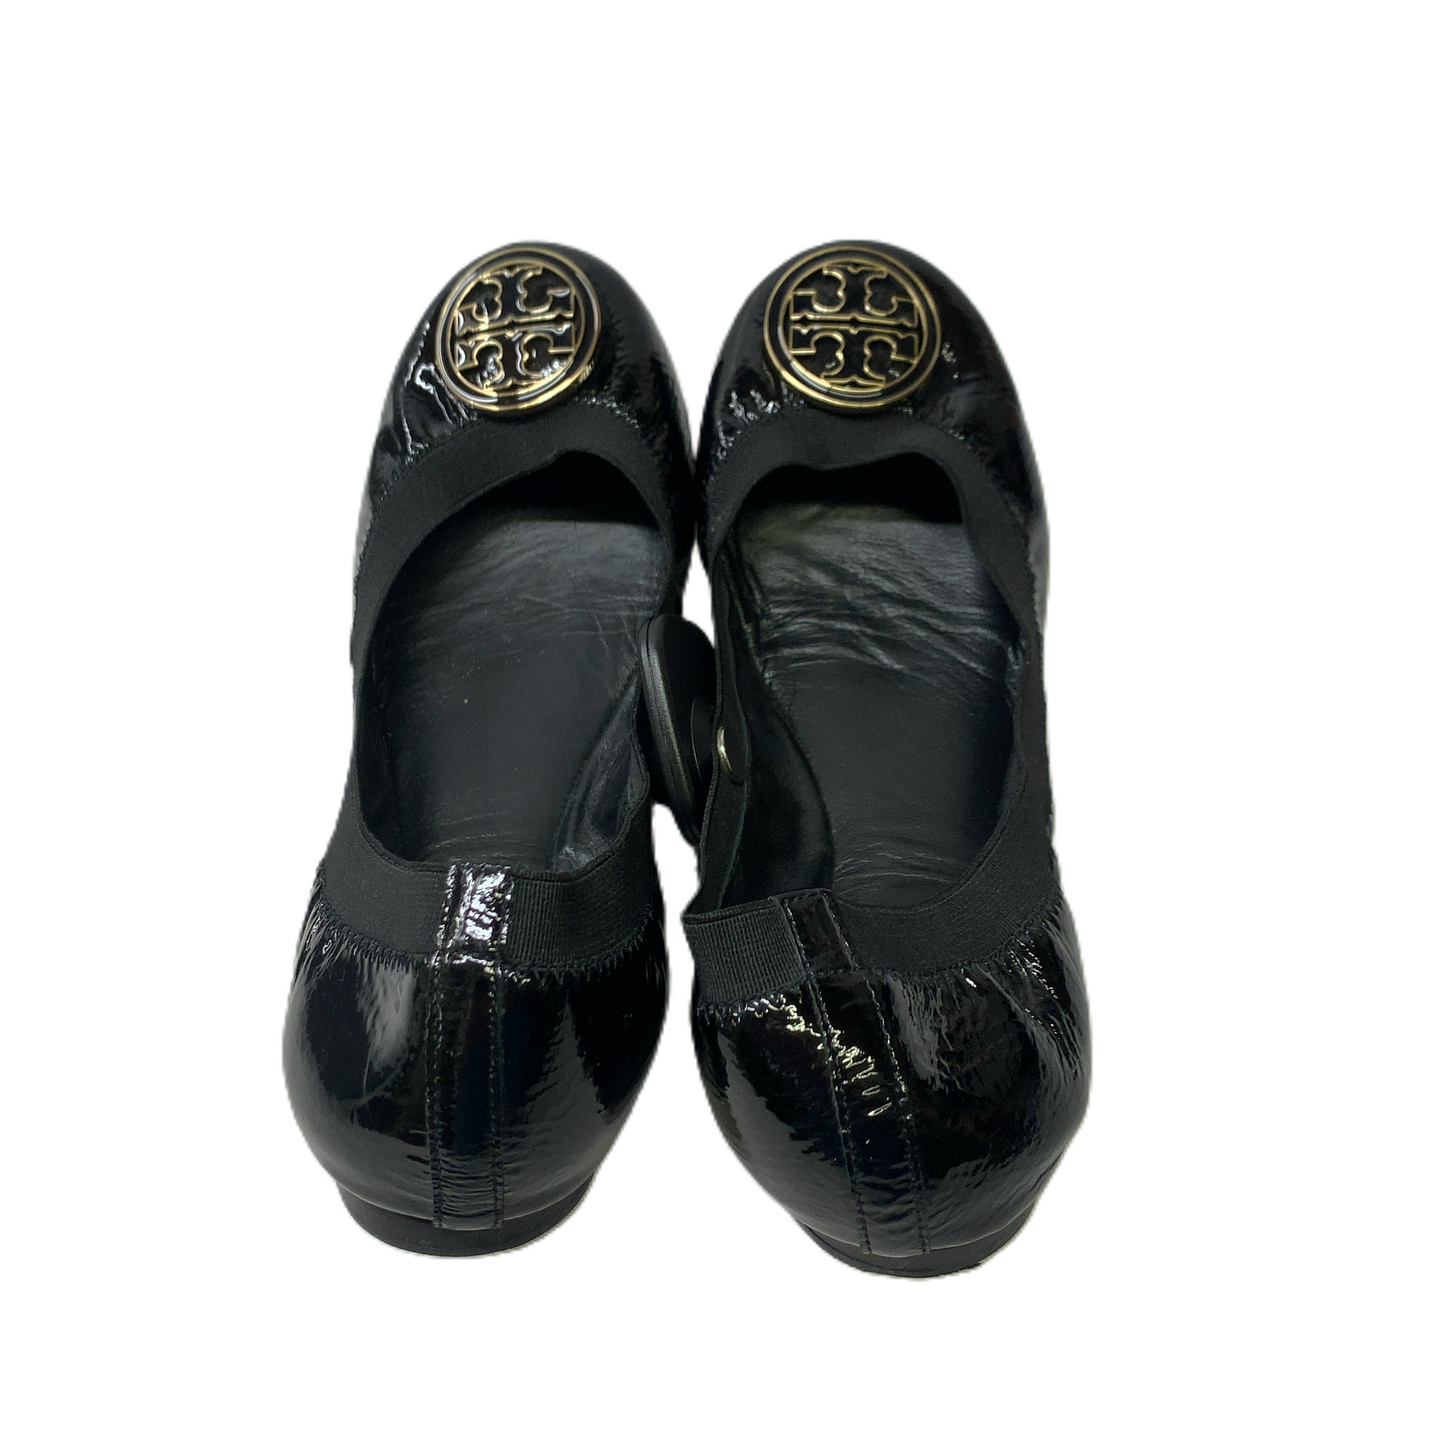 Black  Shoes Designer By Tory Burch  Size: 7